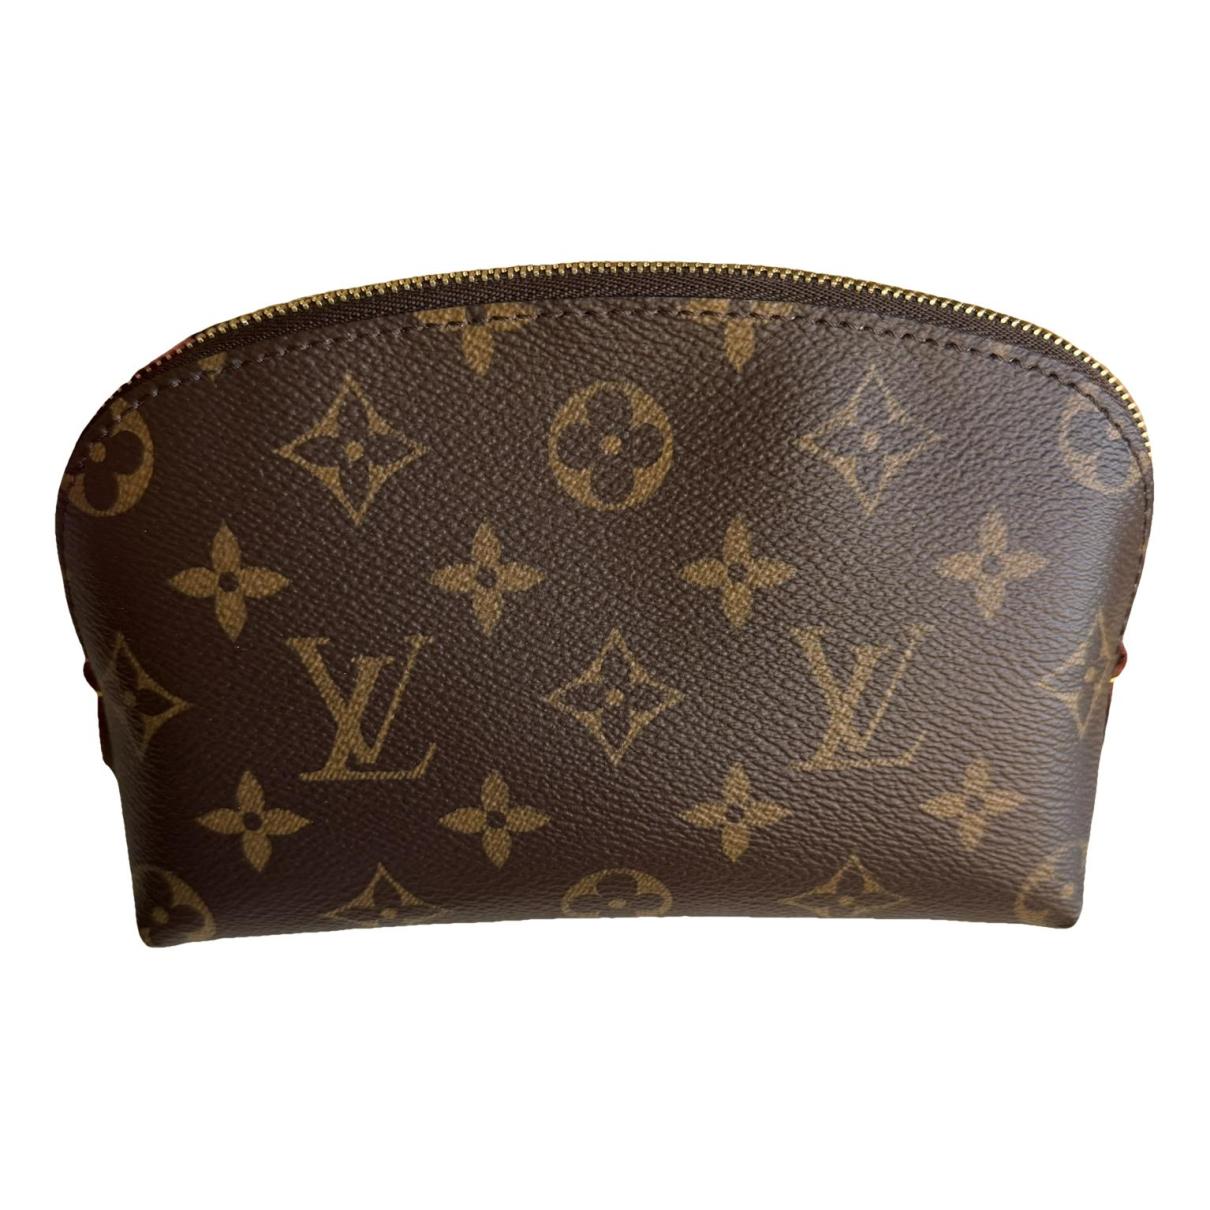 Shop Louis Vuitton Luggage & Travel Bags (M20438) by LESSISMORE☆